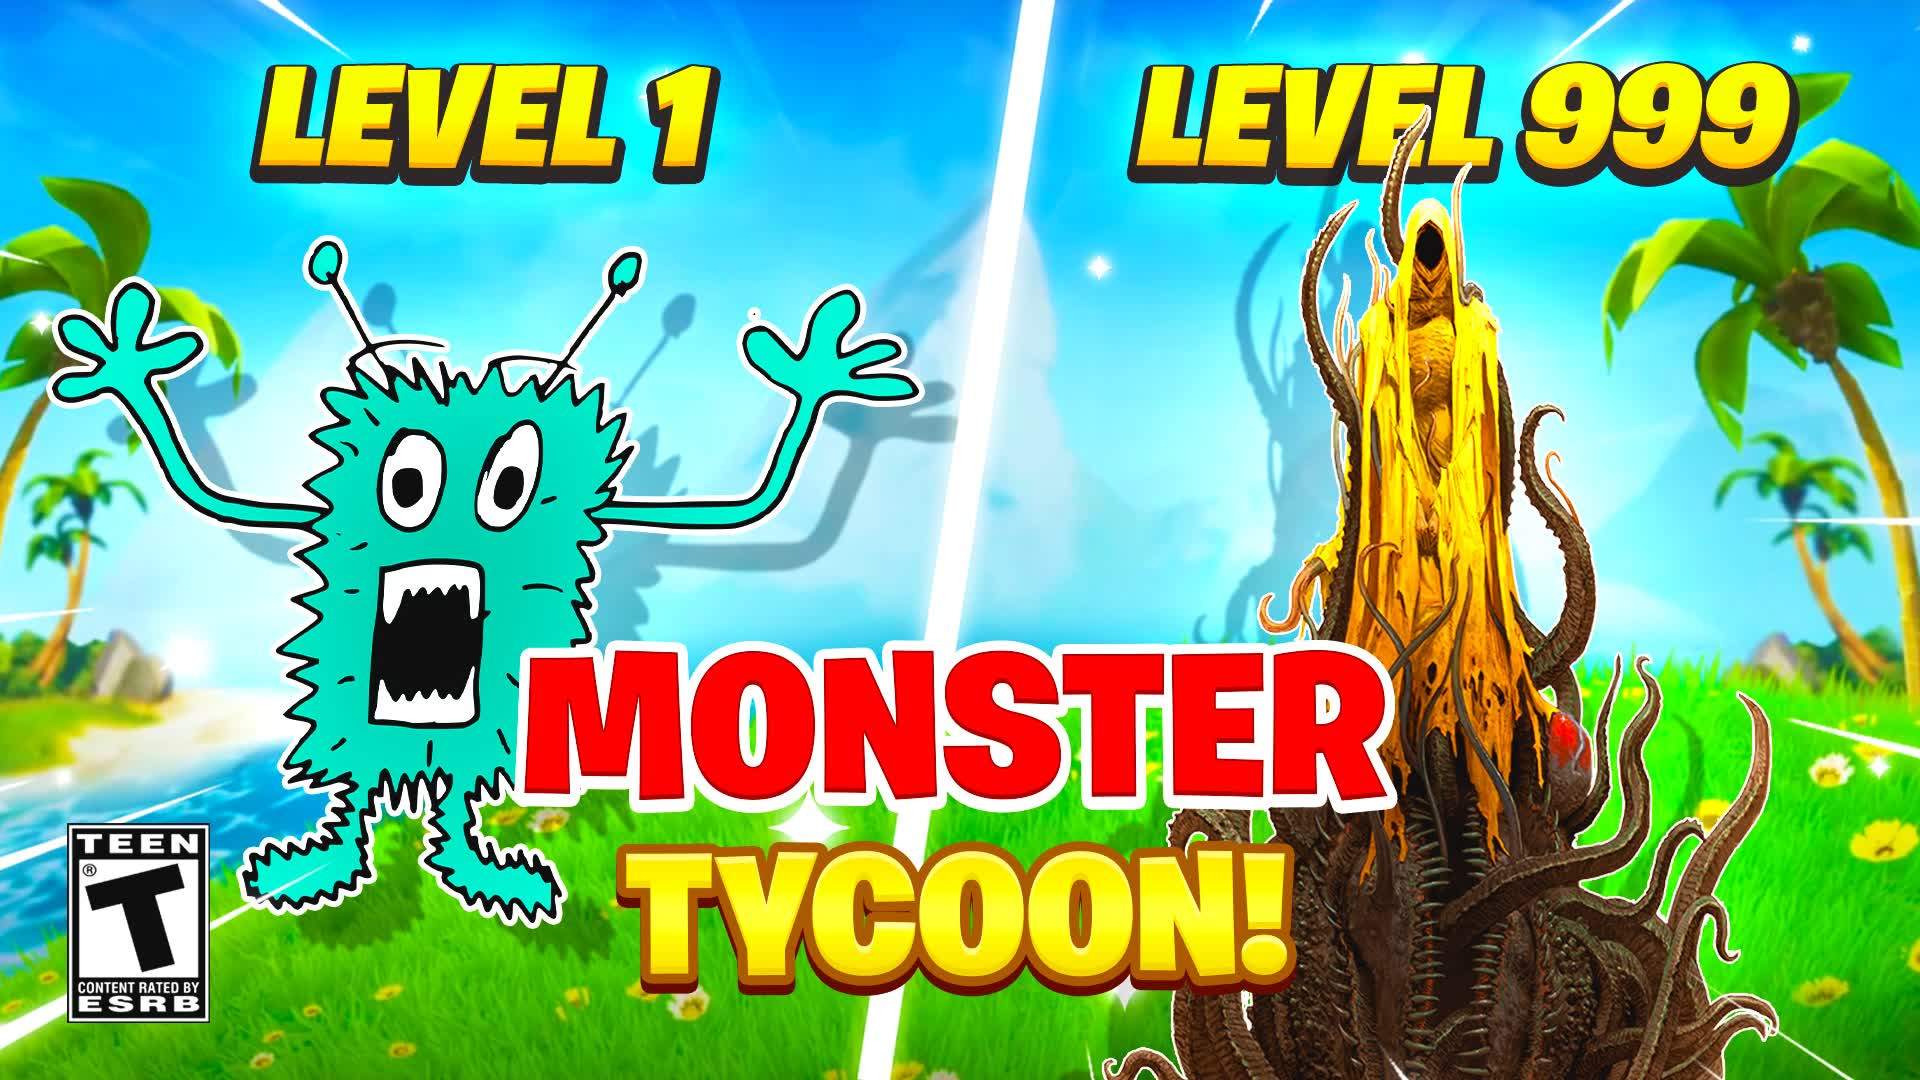 👹 Monster - Tycoon 👹